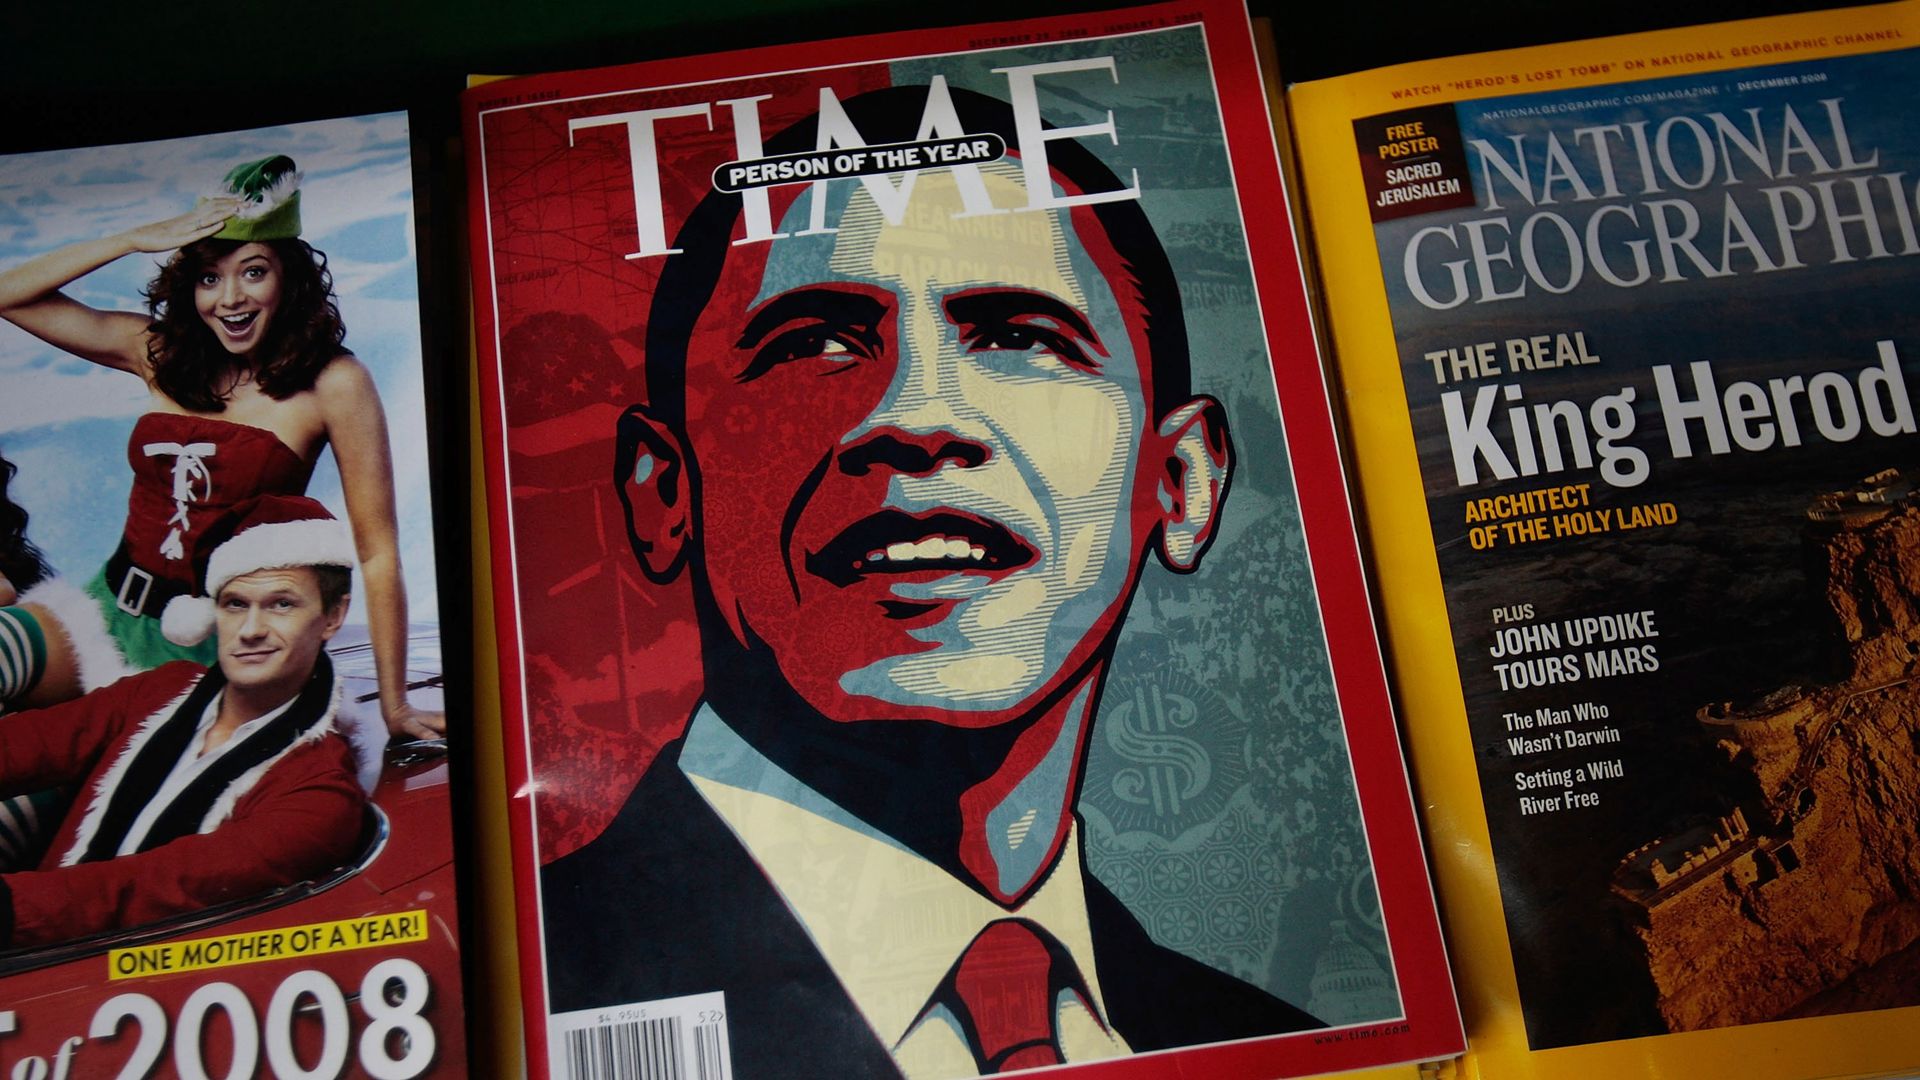 Cover of Time magazine in 2008. Photo: Chris Hondros/Getty Images